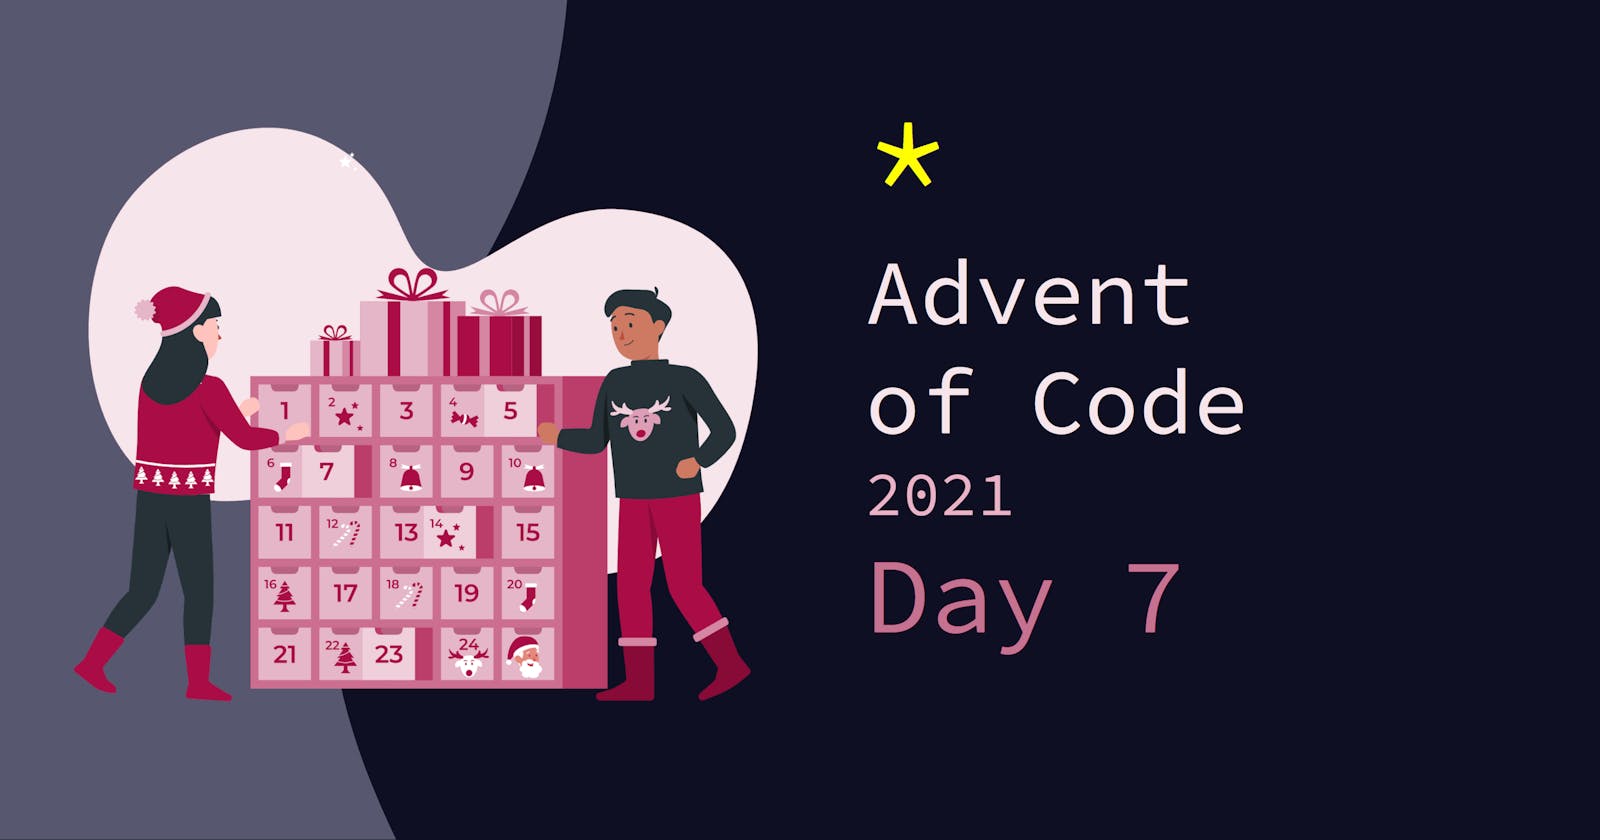 Advent of Code 2021: Day 7